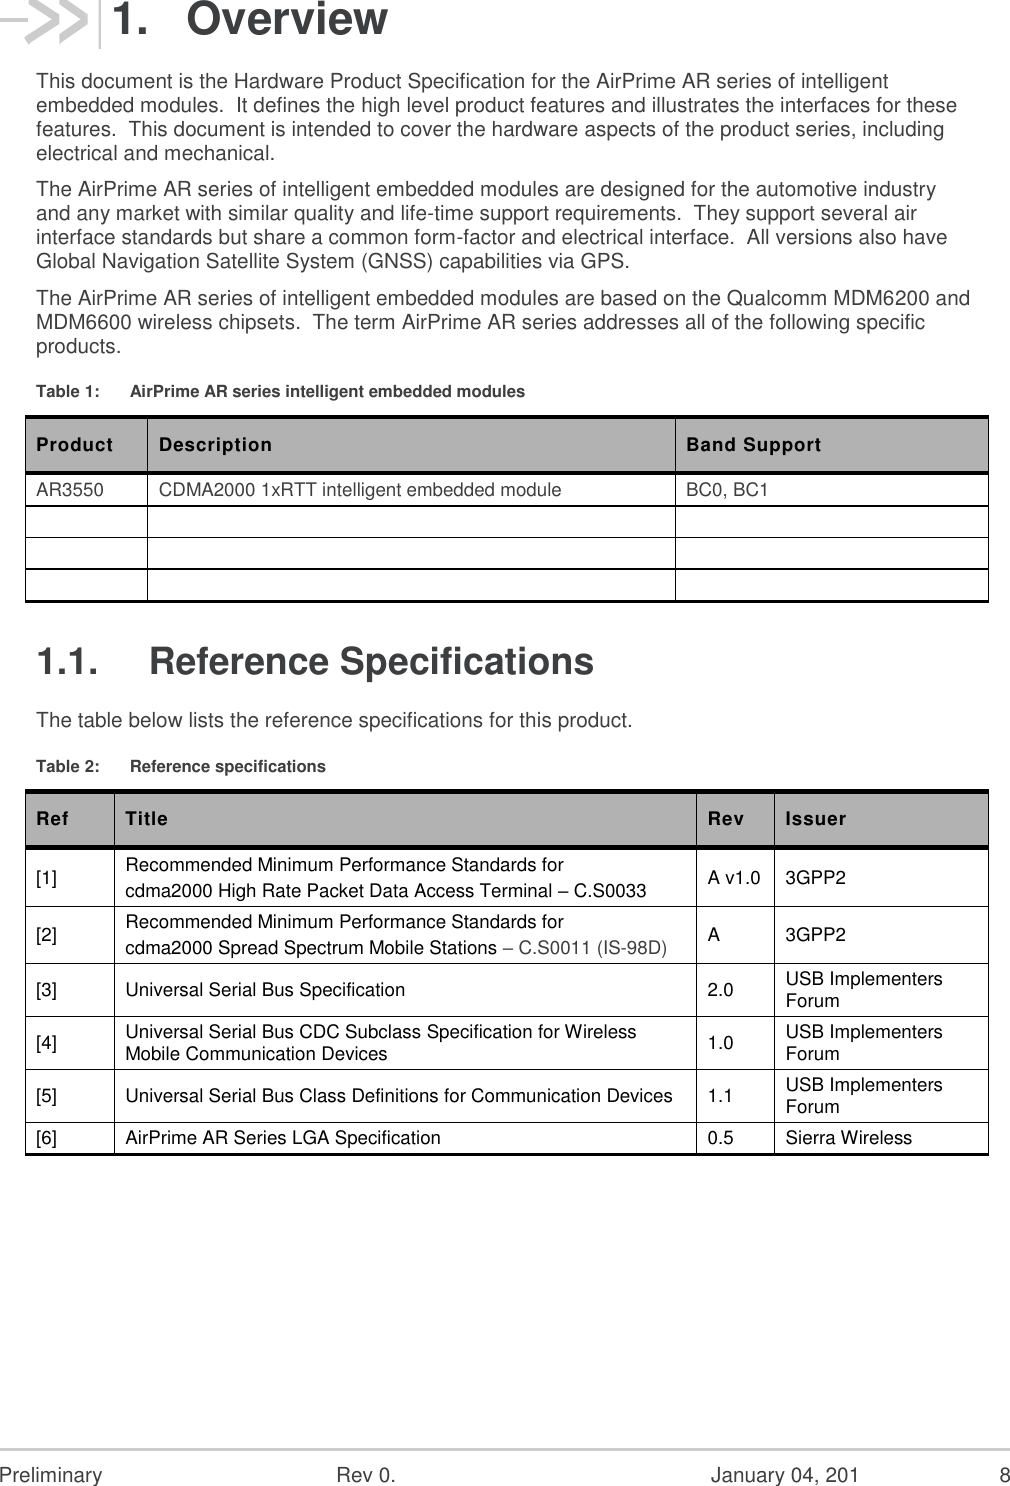  Preliminary  Rev 0.  January 04, 201  8 1.  Overview This document is the Hardware Product Specification for the AirPrime AR series of intelligent embedded modules.  It defines the high level product features and illustrates the interfaces for these features.  This document is intended to cover the hardware aspects of the product series, including electrical and mechanical. The AirPrime AR series of intelligent embedded modules are designed for the automotive industry and any market with similar quality and life-time support requirements.  They support several air interface standards but share a common form-factor and electrical interface.  All versions also have Global Navigation Satellite System (GNSS) capabilities via GPS. The AirPrime AR series of intelligent embedded modules are based on the Qualcomm MDM6200 and MDM6600 wireless chipsets.  The term AirPrime AR series addresses all of the following specific products. Table 1:  AirPrime AR series intelligent embedded modules Product Description Band Support AR3550 CDMA2000 1xRTT intelligent embedded module BC0, BC1          1.1.  Reference Specifications The table below lists the reference specifications for this product. Table 2:  Reference specifications Ref Title Rev Issuer [1] Recommended Minimum Performance Standards for cdma2000 High Rate Packet Data Access Terminal – C.S0033 A v1.0 3GPP2 [2] Recommended Minimum Performance Standards for cdma2000 Spread Spectrum Mobile Stations – C.S0011 (IS-98D) A 3GPP2 [3] Universal Serial Bus Specification 2.0 USB Implementers Forum [4] Universal Serial Bus CDC Subclass Specification for Wireless Mobile Communication Devices 1.0 USB Implementers Forum [5] Universal Serial Bus Class Definitions for Communication Devices 1.1 USB Implementers Forum [6] AirPrime AR Series LGA Specification 0.5 Sierra Wireless  